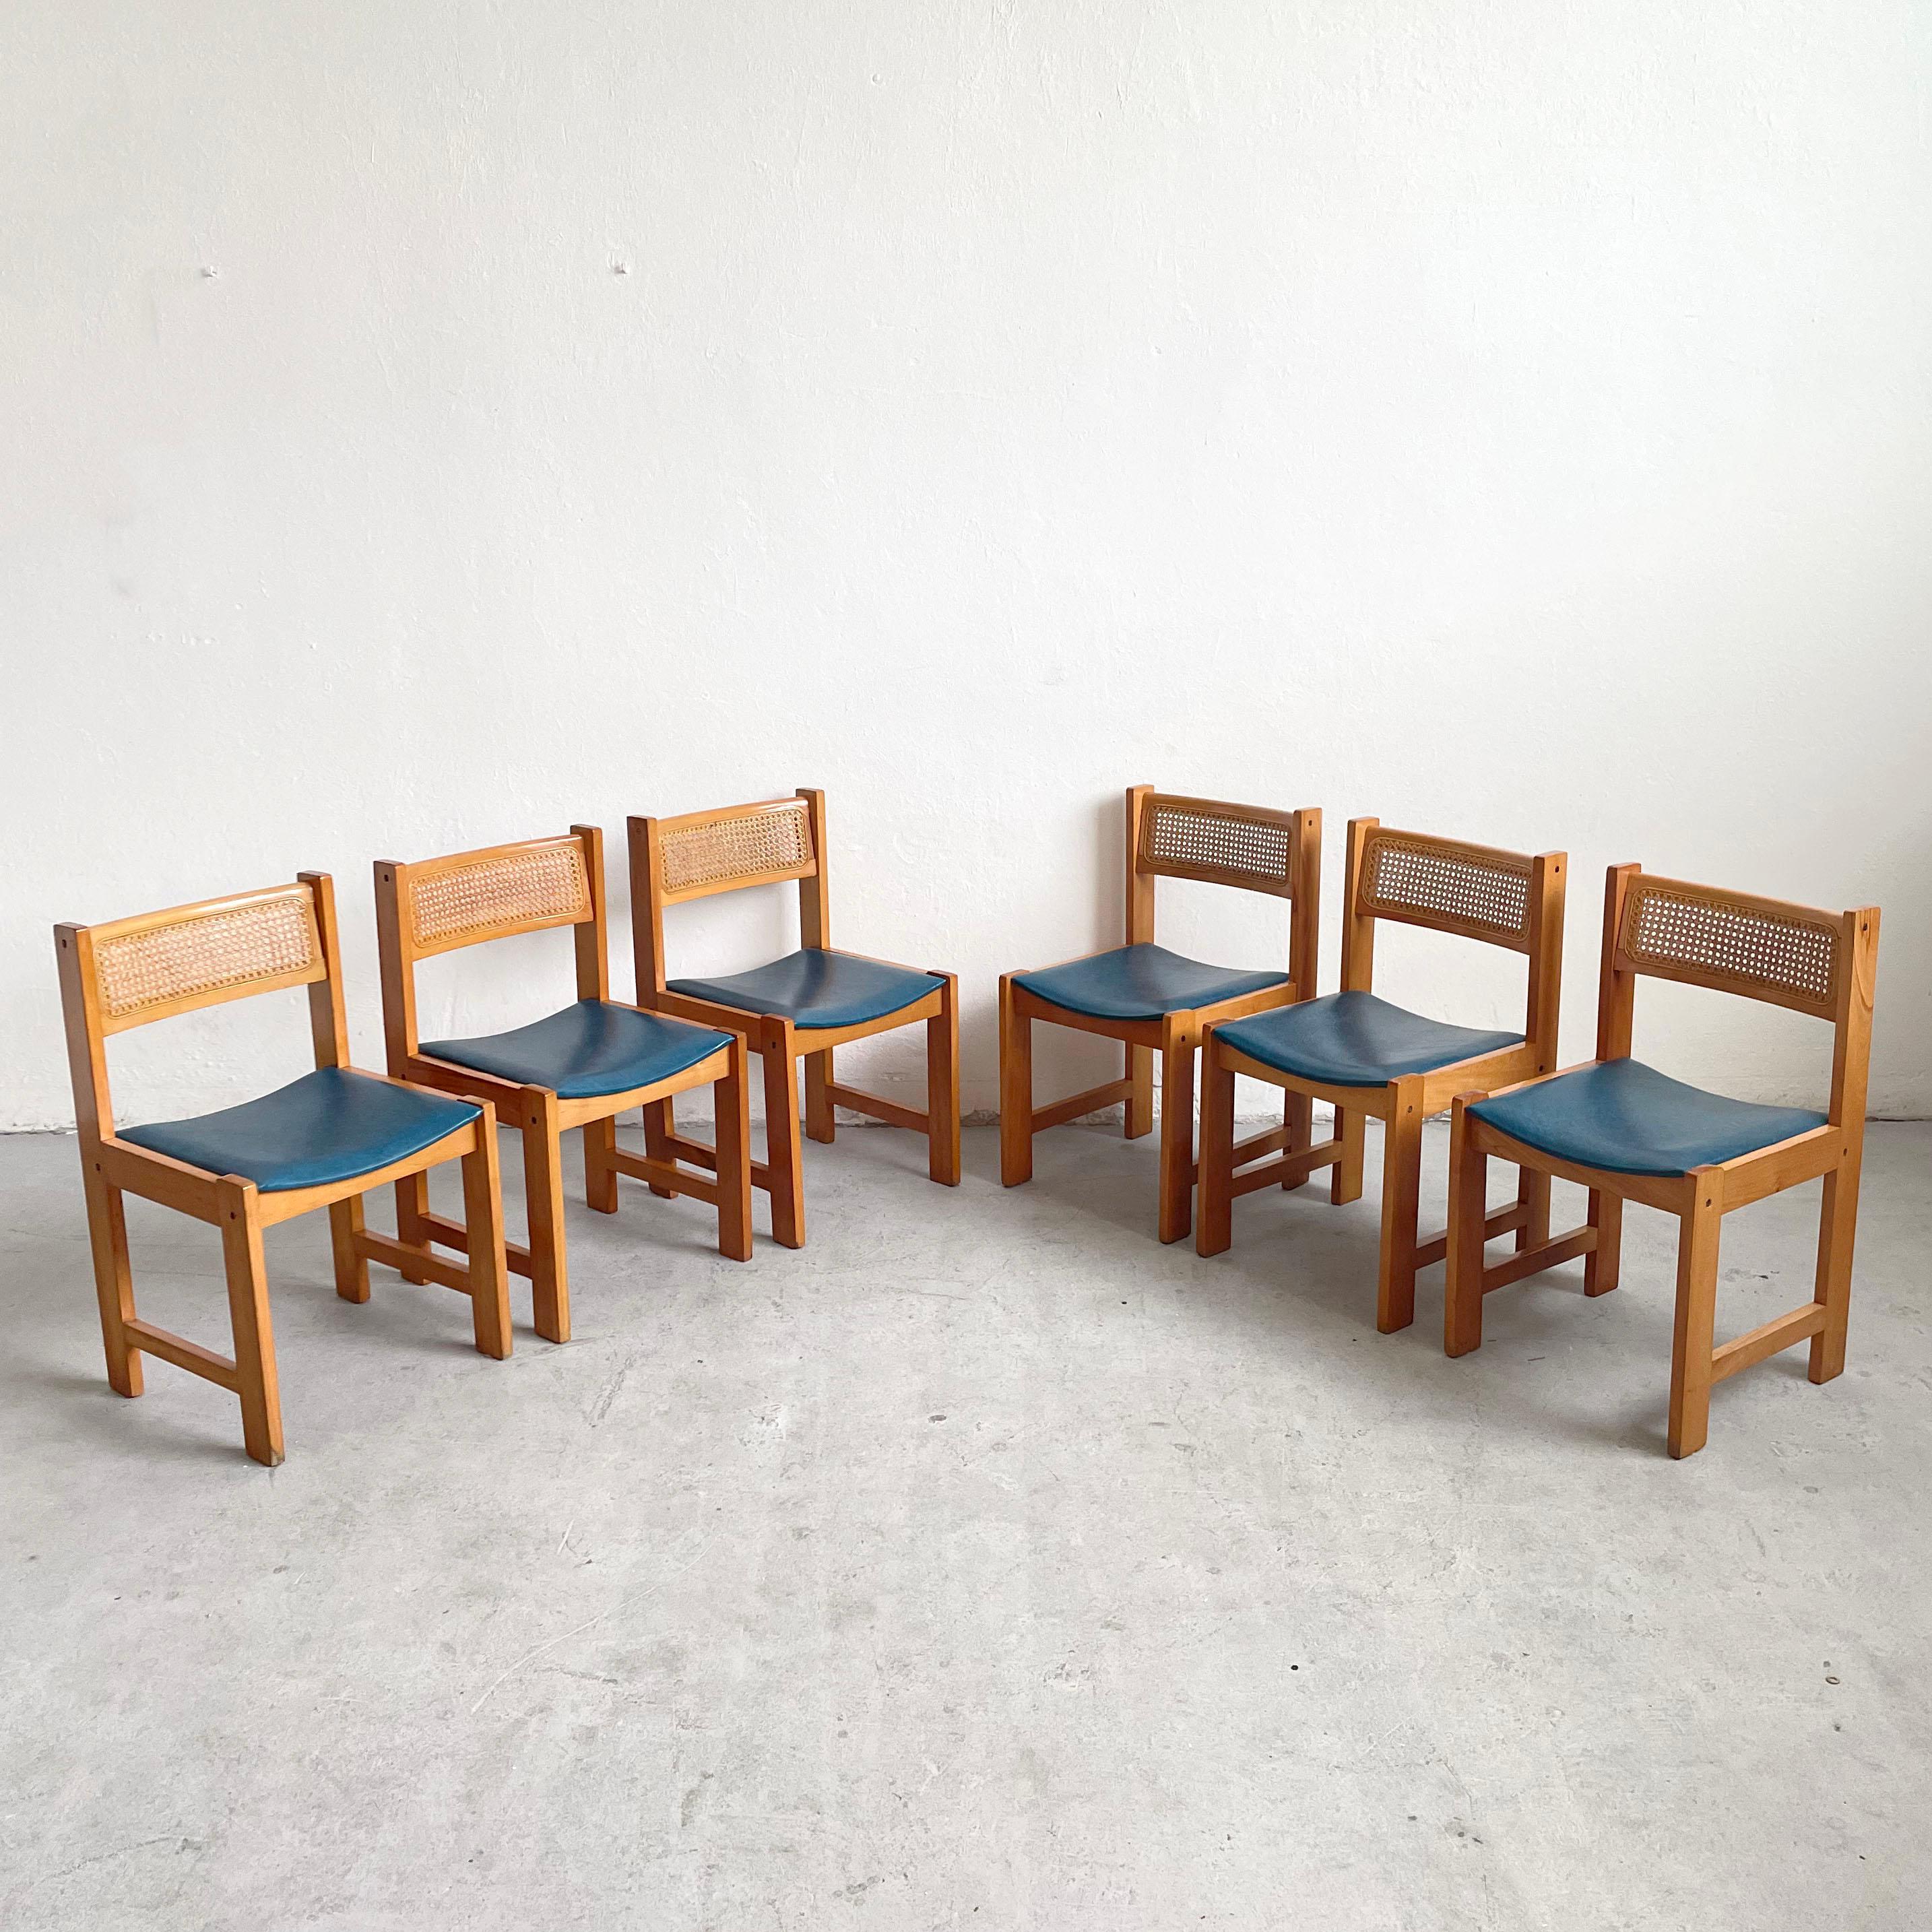 This is a set of 6 vintage dining chairs.

Beautiful vintage mid century wooden dining chair feature blue vinyl seat with dark patches and a cane backrest. They have a very simple and elegant modernist form. 

The chairs have original finish which